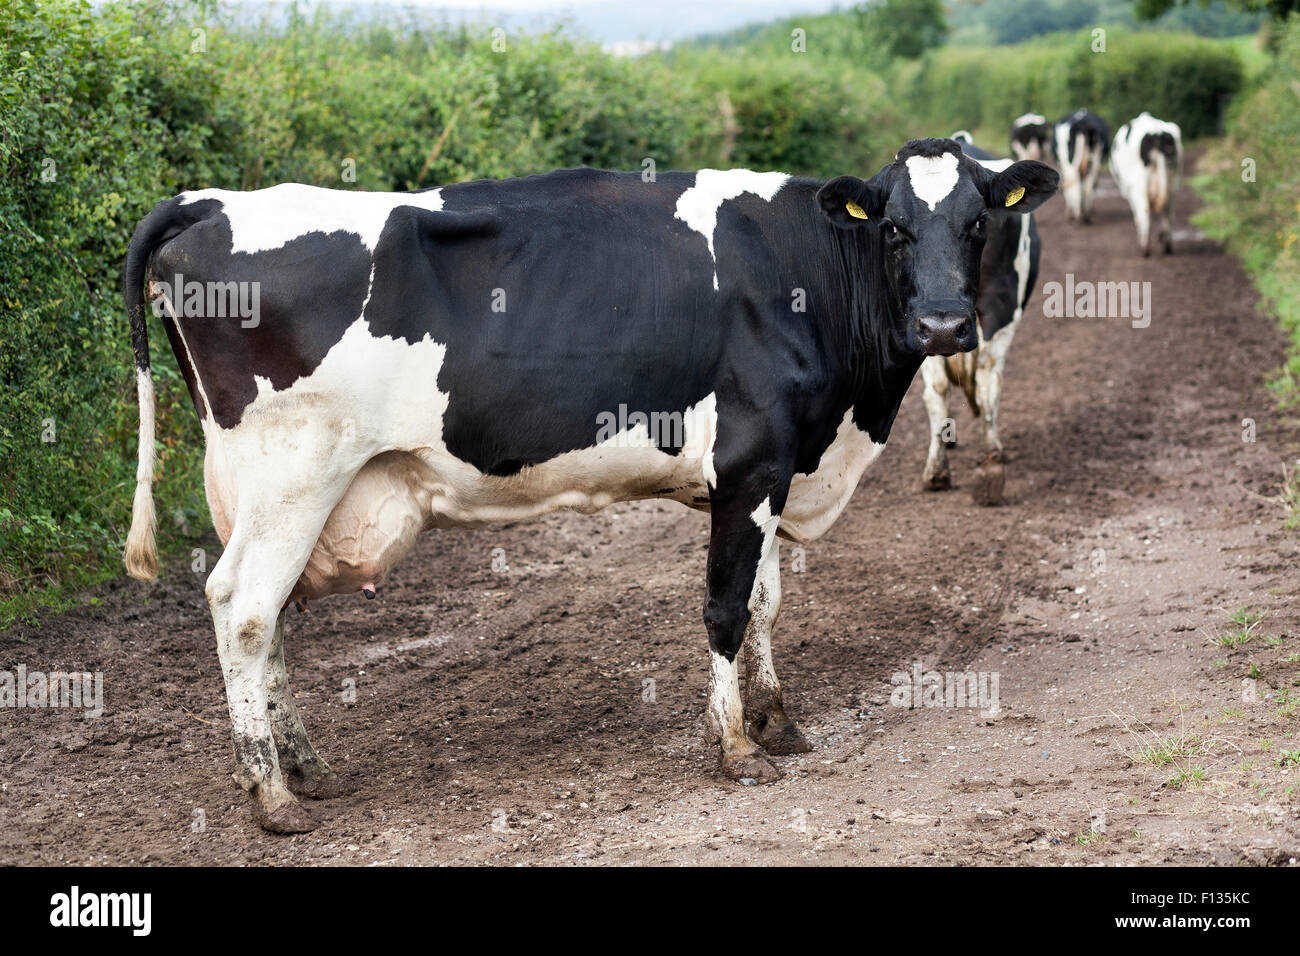 cows heading out after milking,Holstein Friesians are a breed of cattle known today as the world's highest-production dairy cow,Bos taurus.high milk Stock Photo